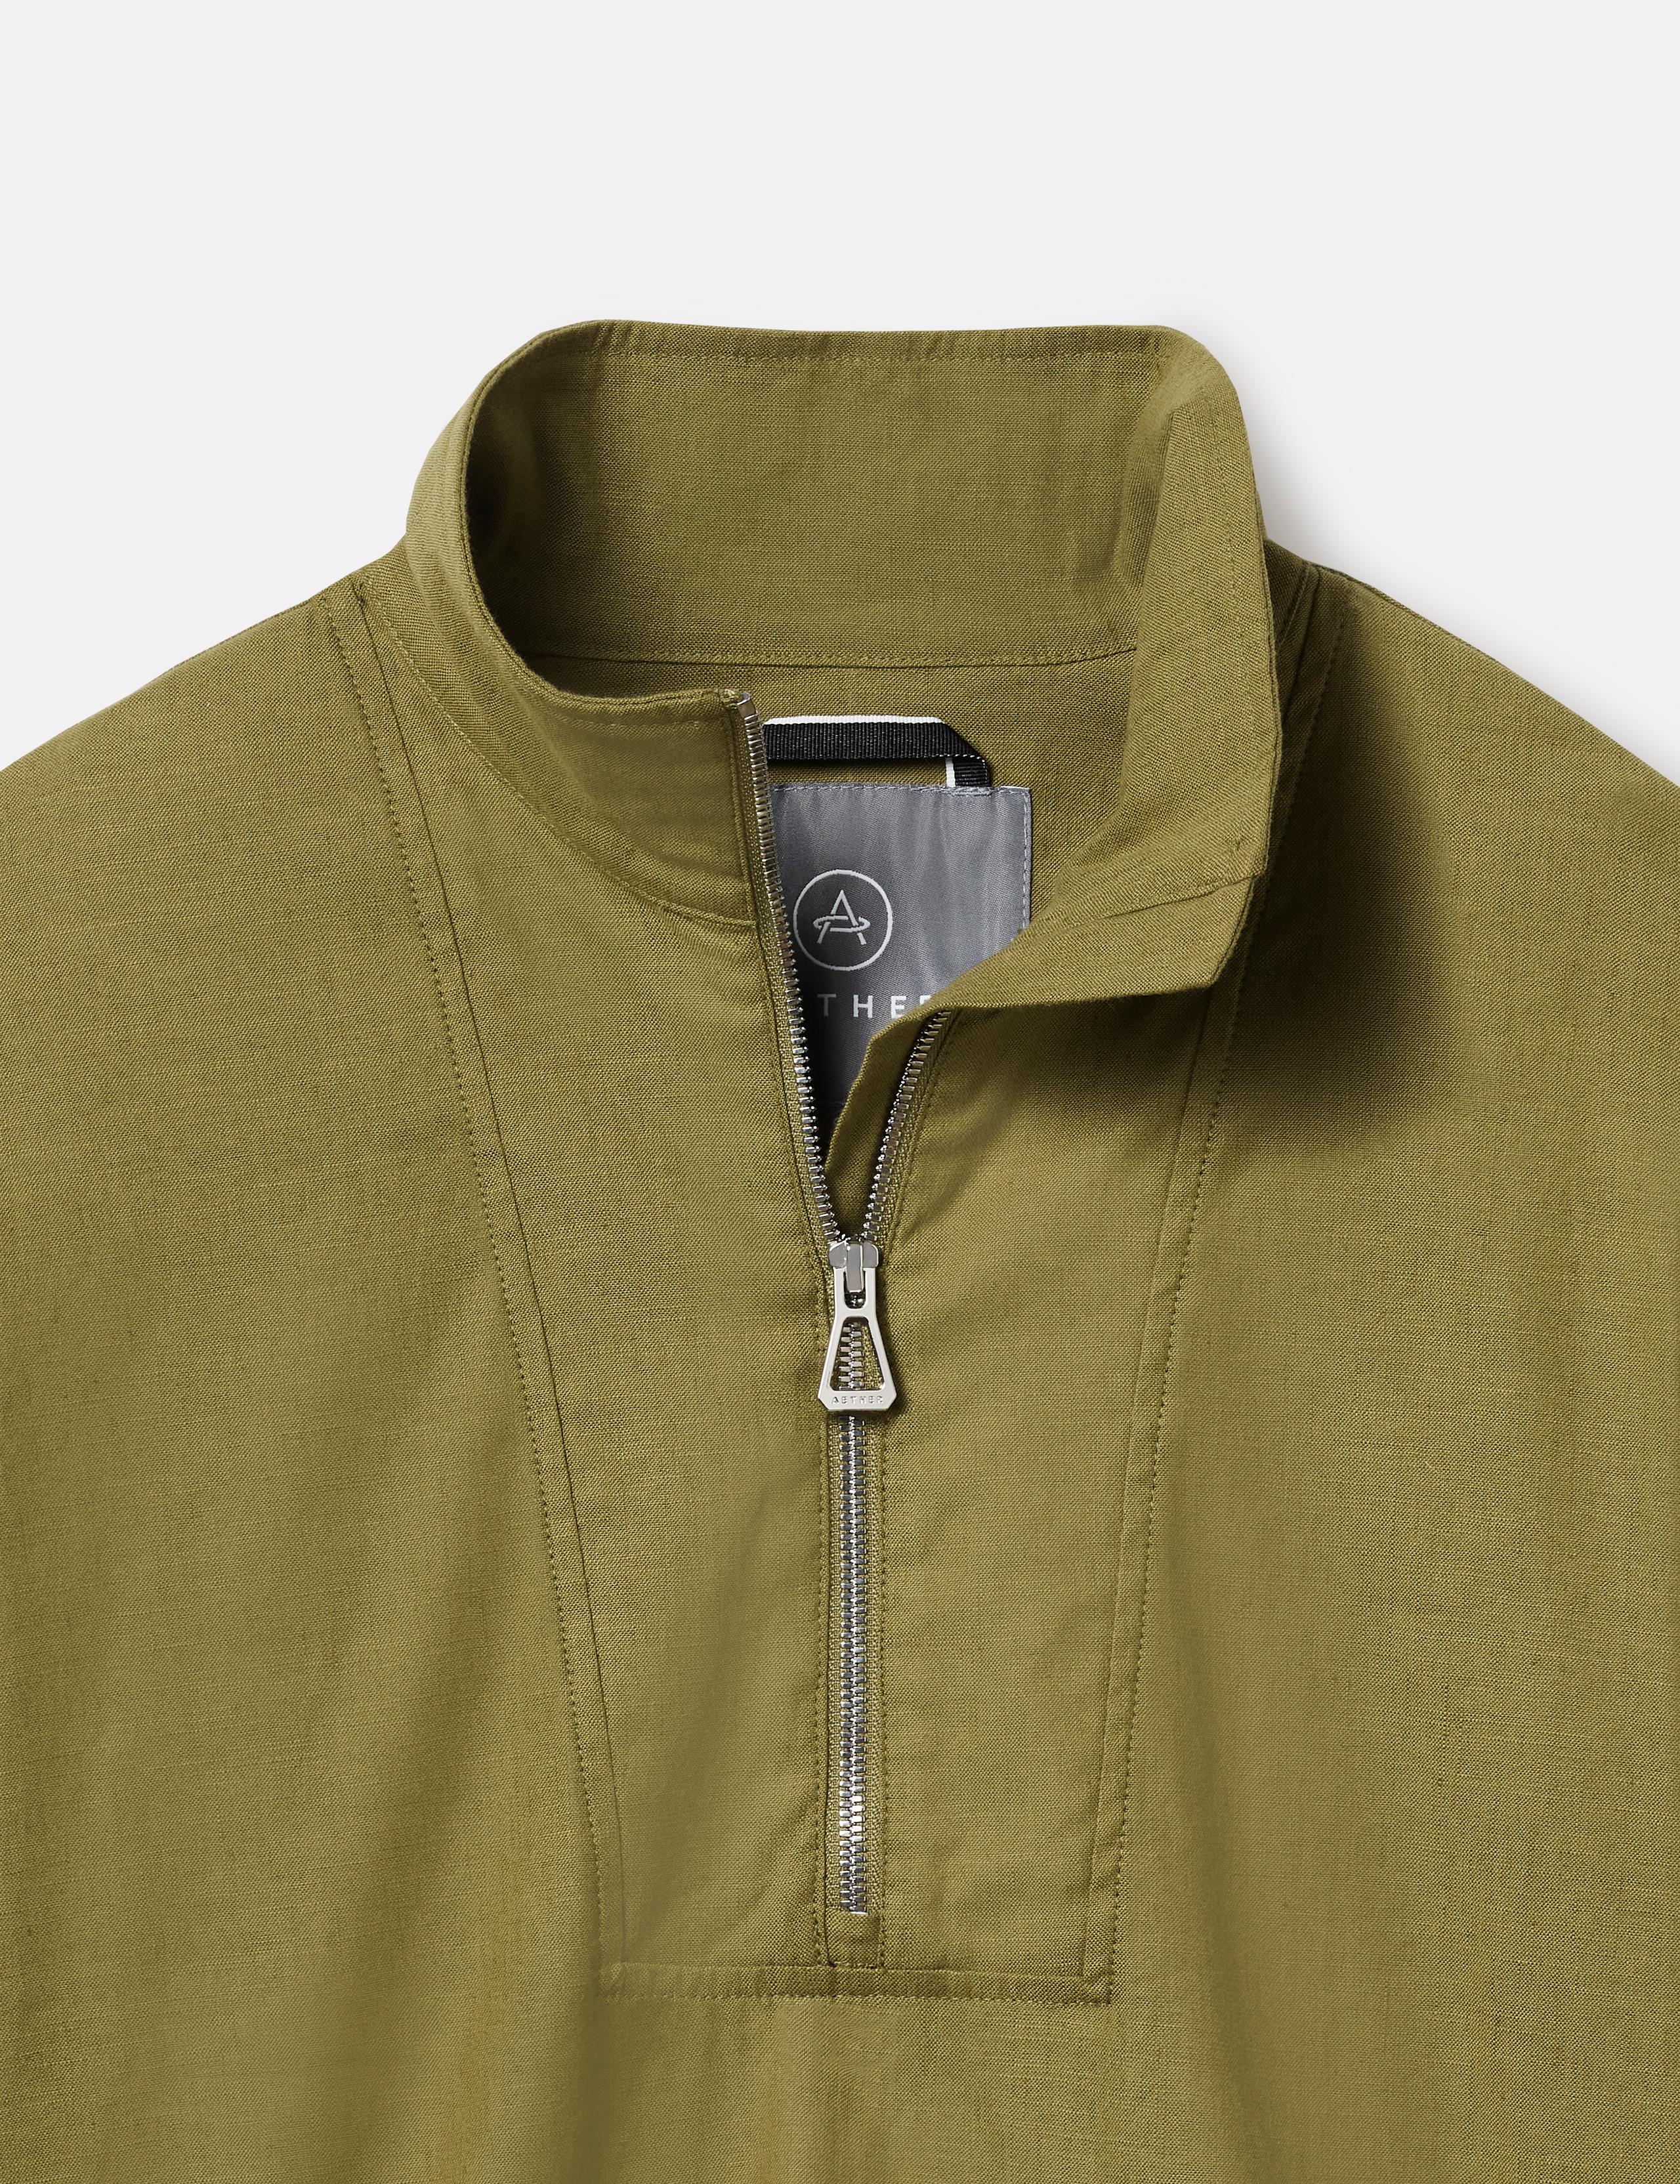 Close-up view of jacket collar and zipper